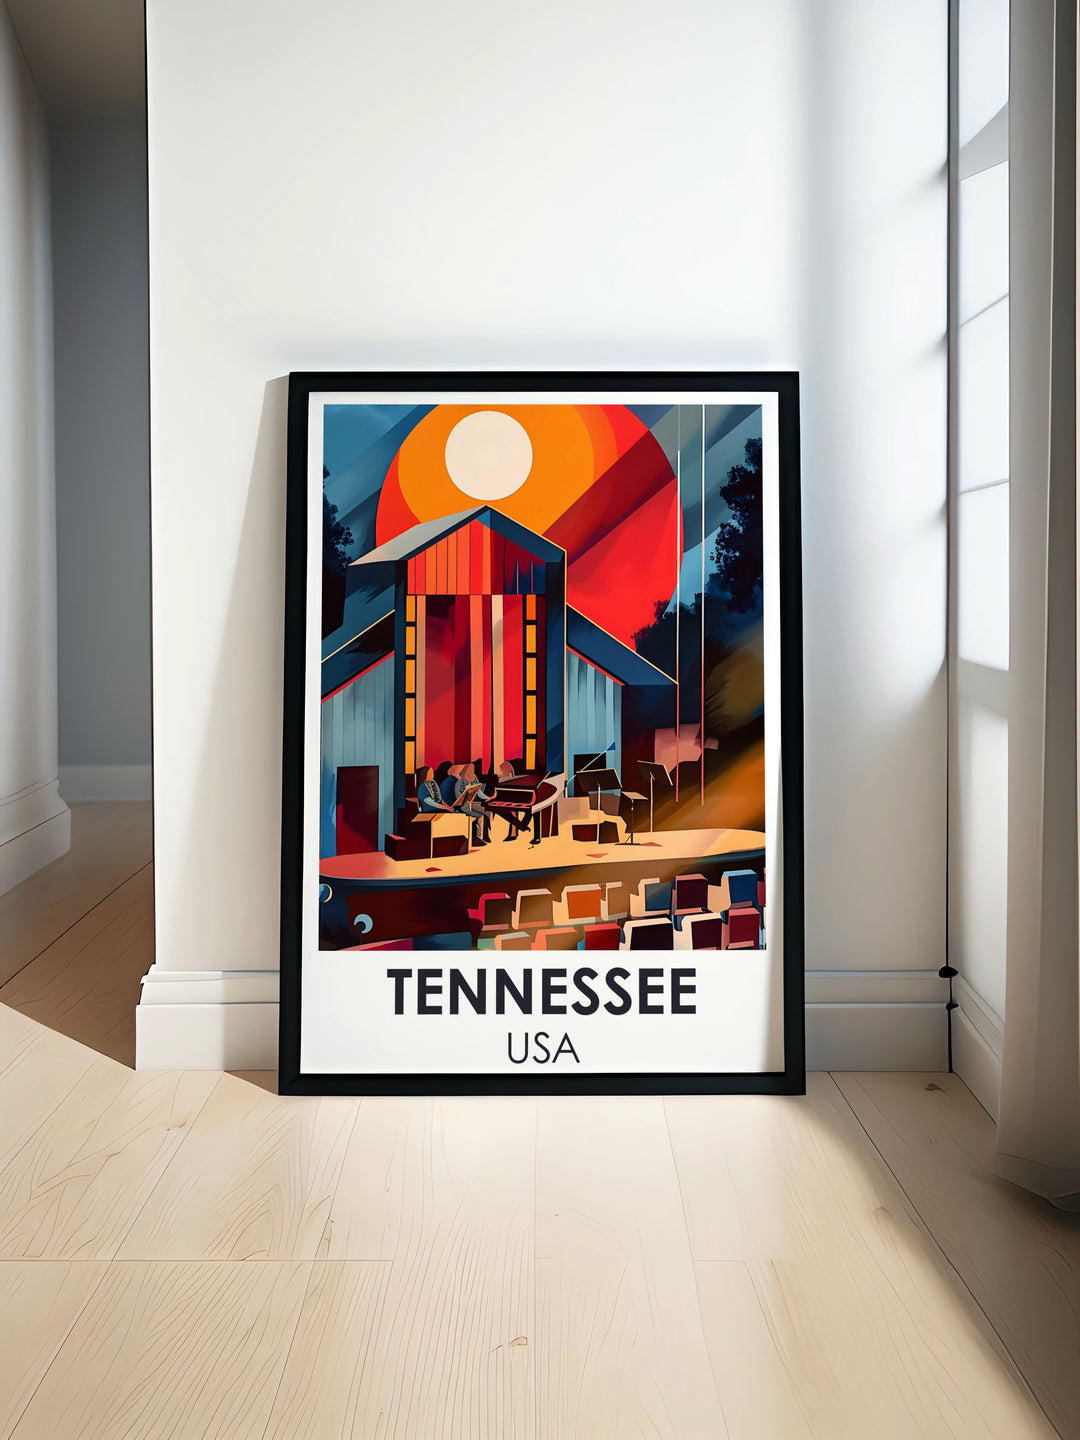 Ryman Auditorium Country Music Art featuring the iconic Nashville Tennessee venue with vibrant colors and intricate details. Perfect for fans of The Grand Ole Opry this Nashville poster is an excellent addition to any home decor and country music collection.